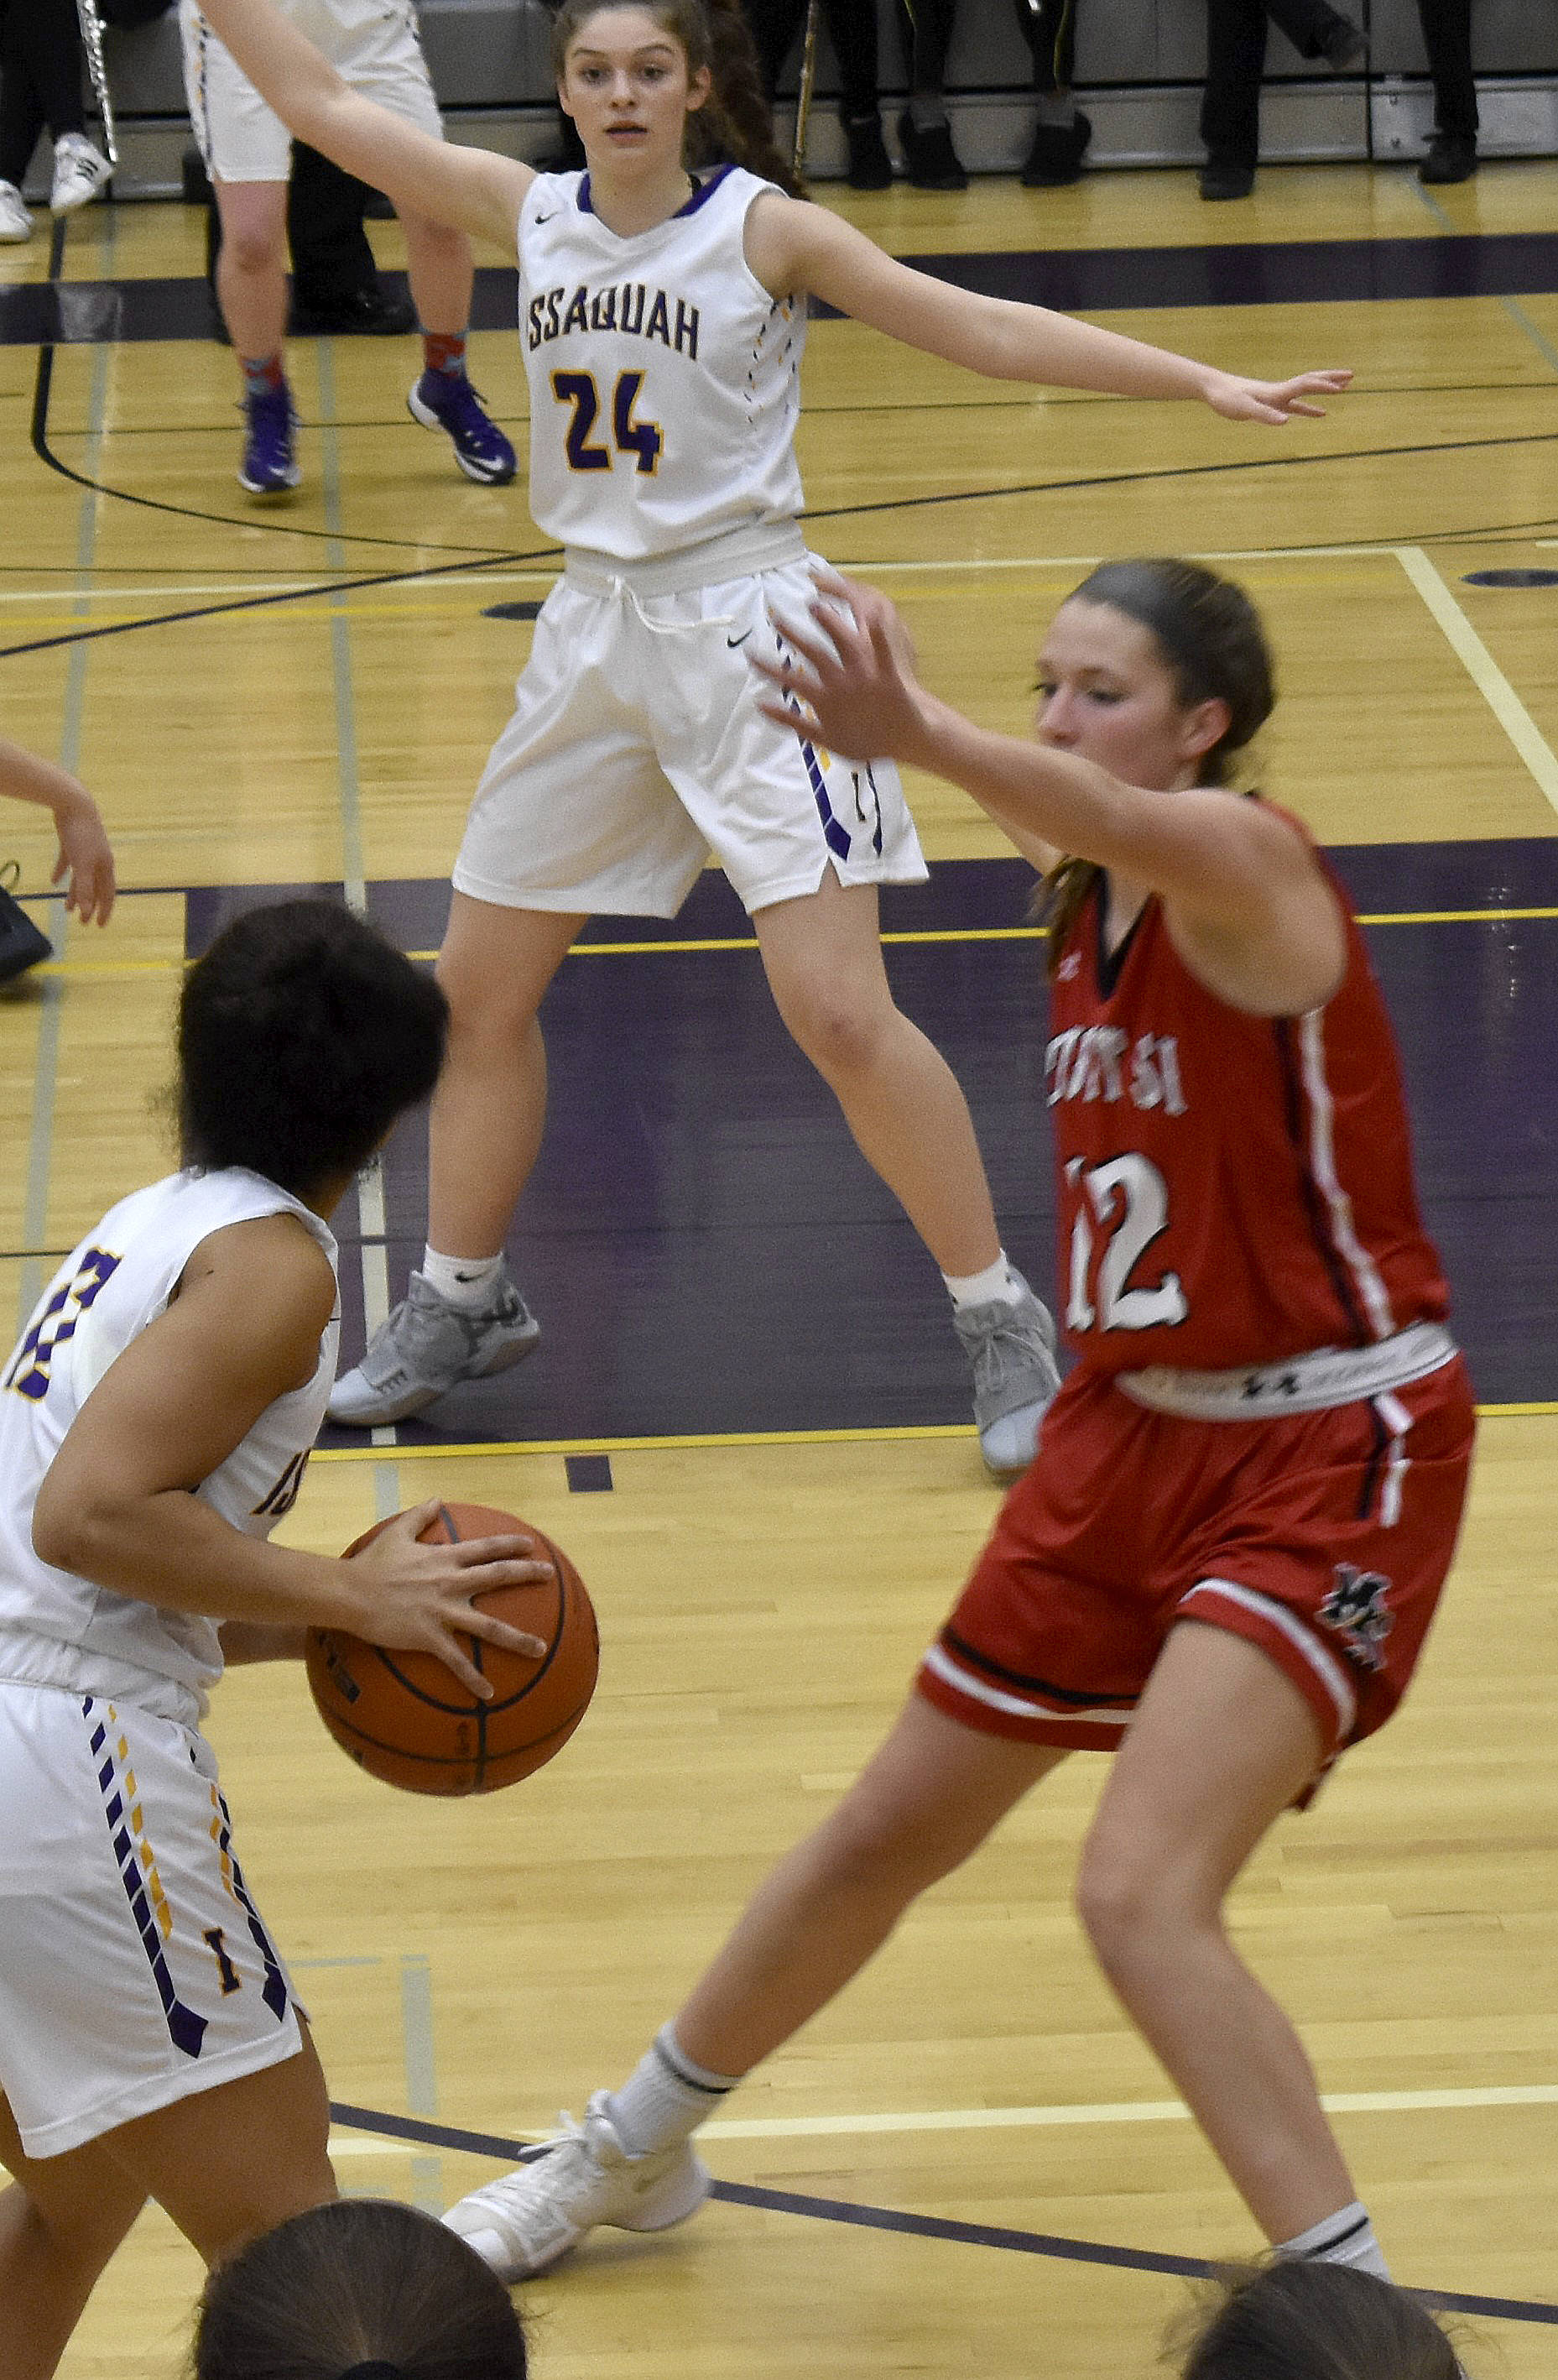 Mount Si girls basketball co-captain Sam Smith defends against Issaquah in a Jan. 5 away game. Issaquah one the game in a dramatic last-second layup. (Photo courtesy of Charles Samuelson)